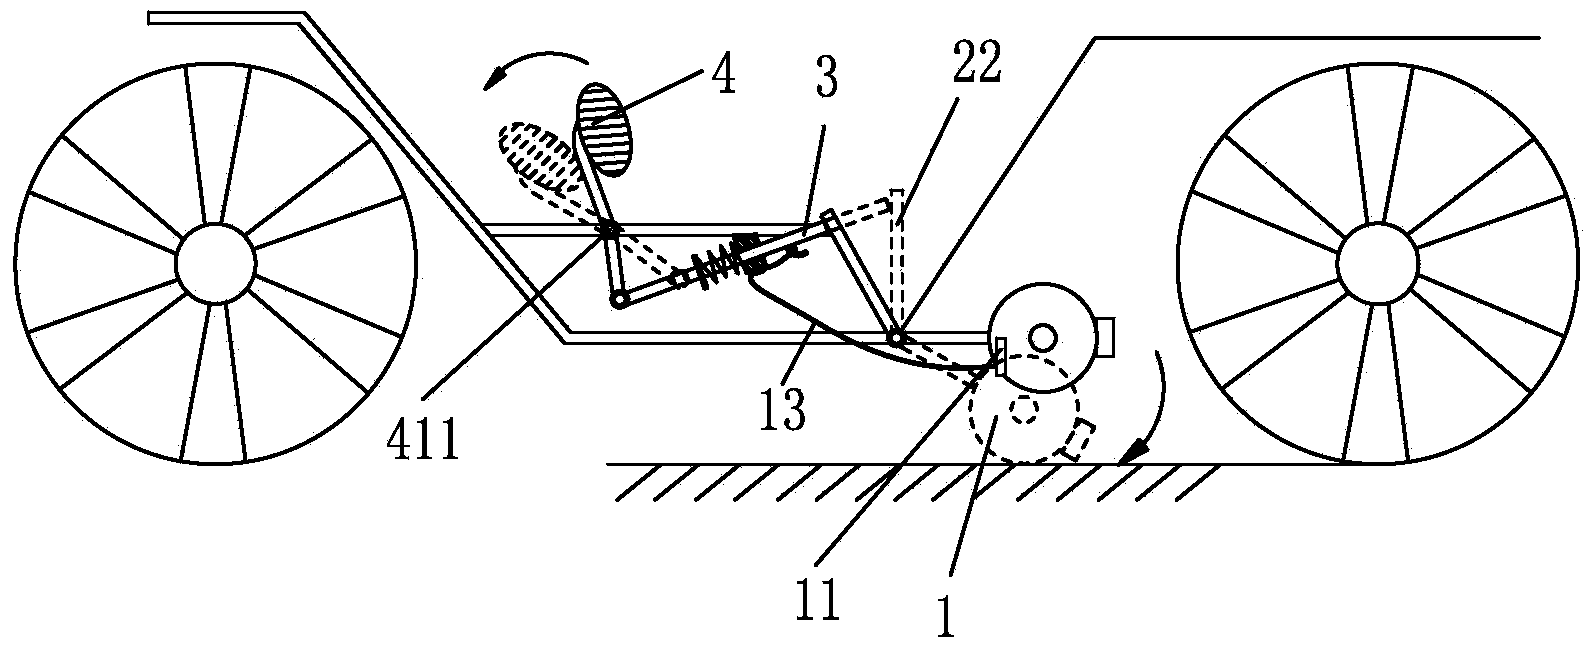 Improved structure of brake apparatus of electric vehicle